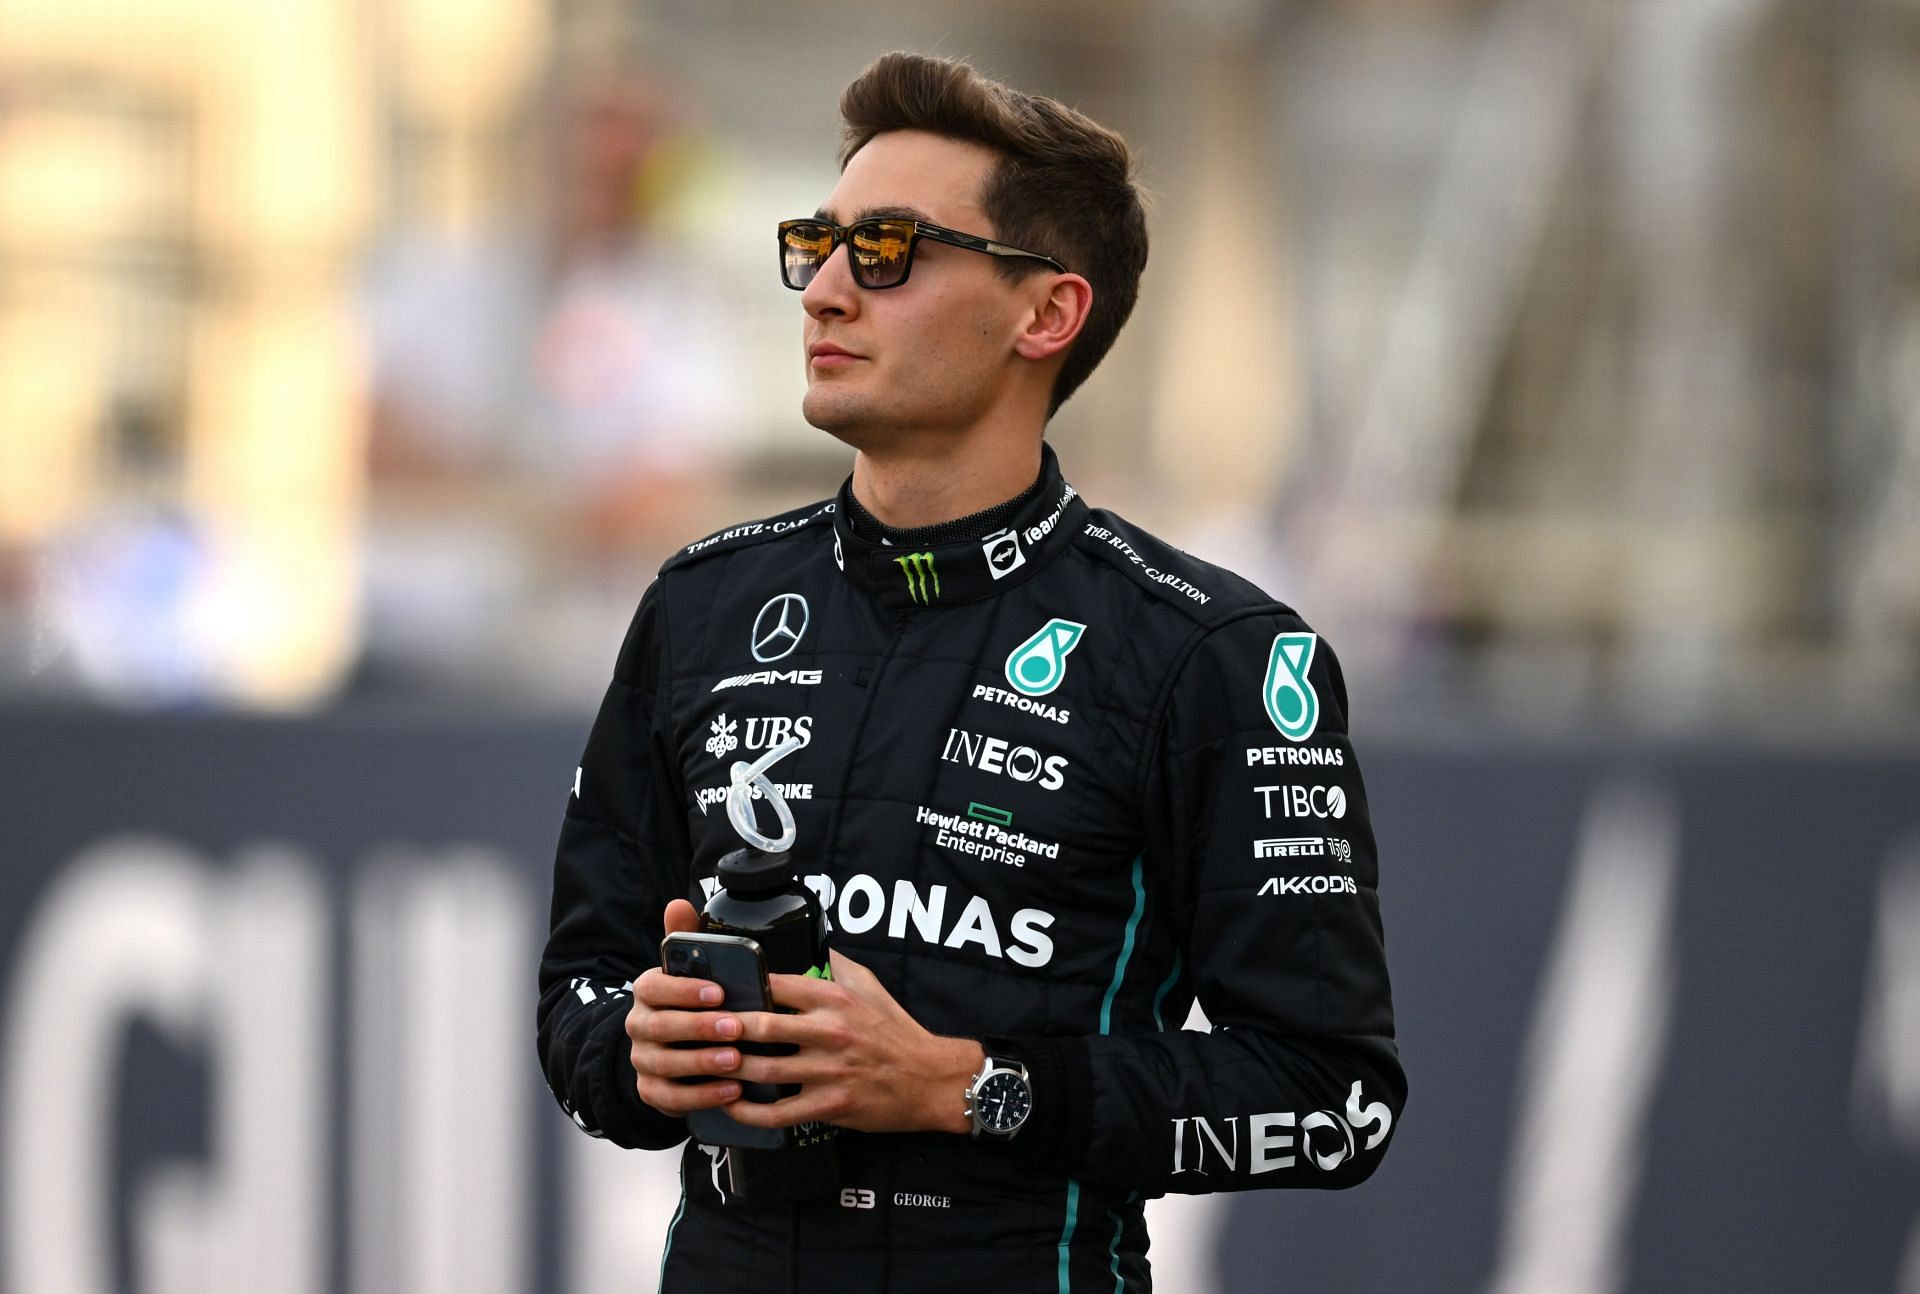 F1 Grand Prix of Bahrain - George Russell makes his proper debut for Mercedes.